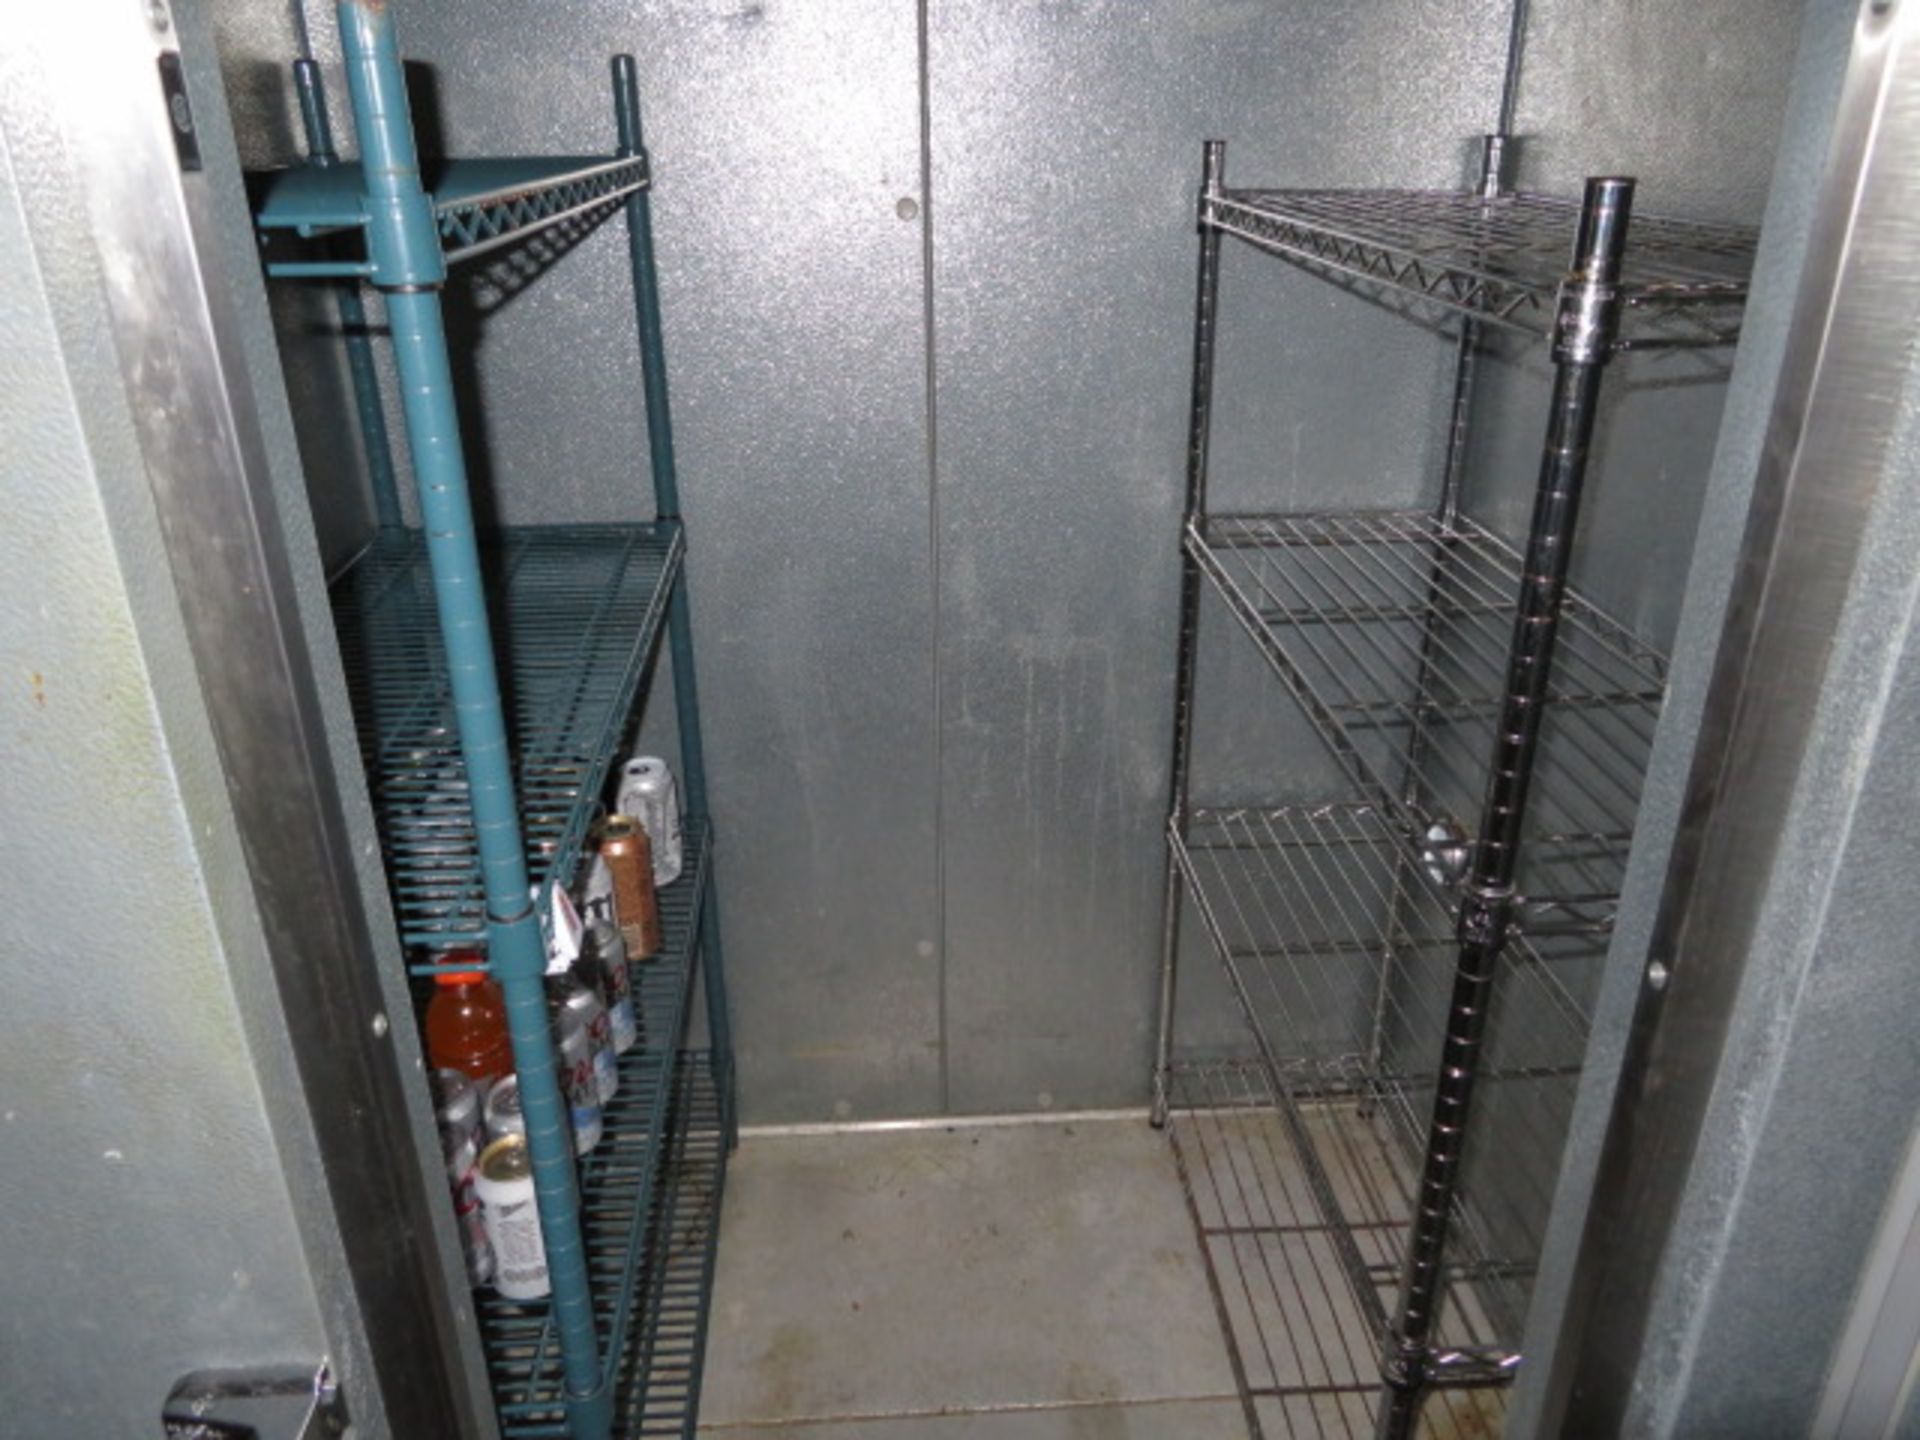 NORLAKE WALK-IN COOLER, 5'X5' W/SHELVING, MDL. KLB45-CR-SUB (Located - Mays Landing, NJ) - Image 3 of 9